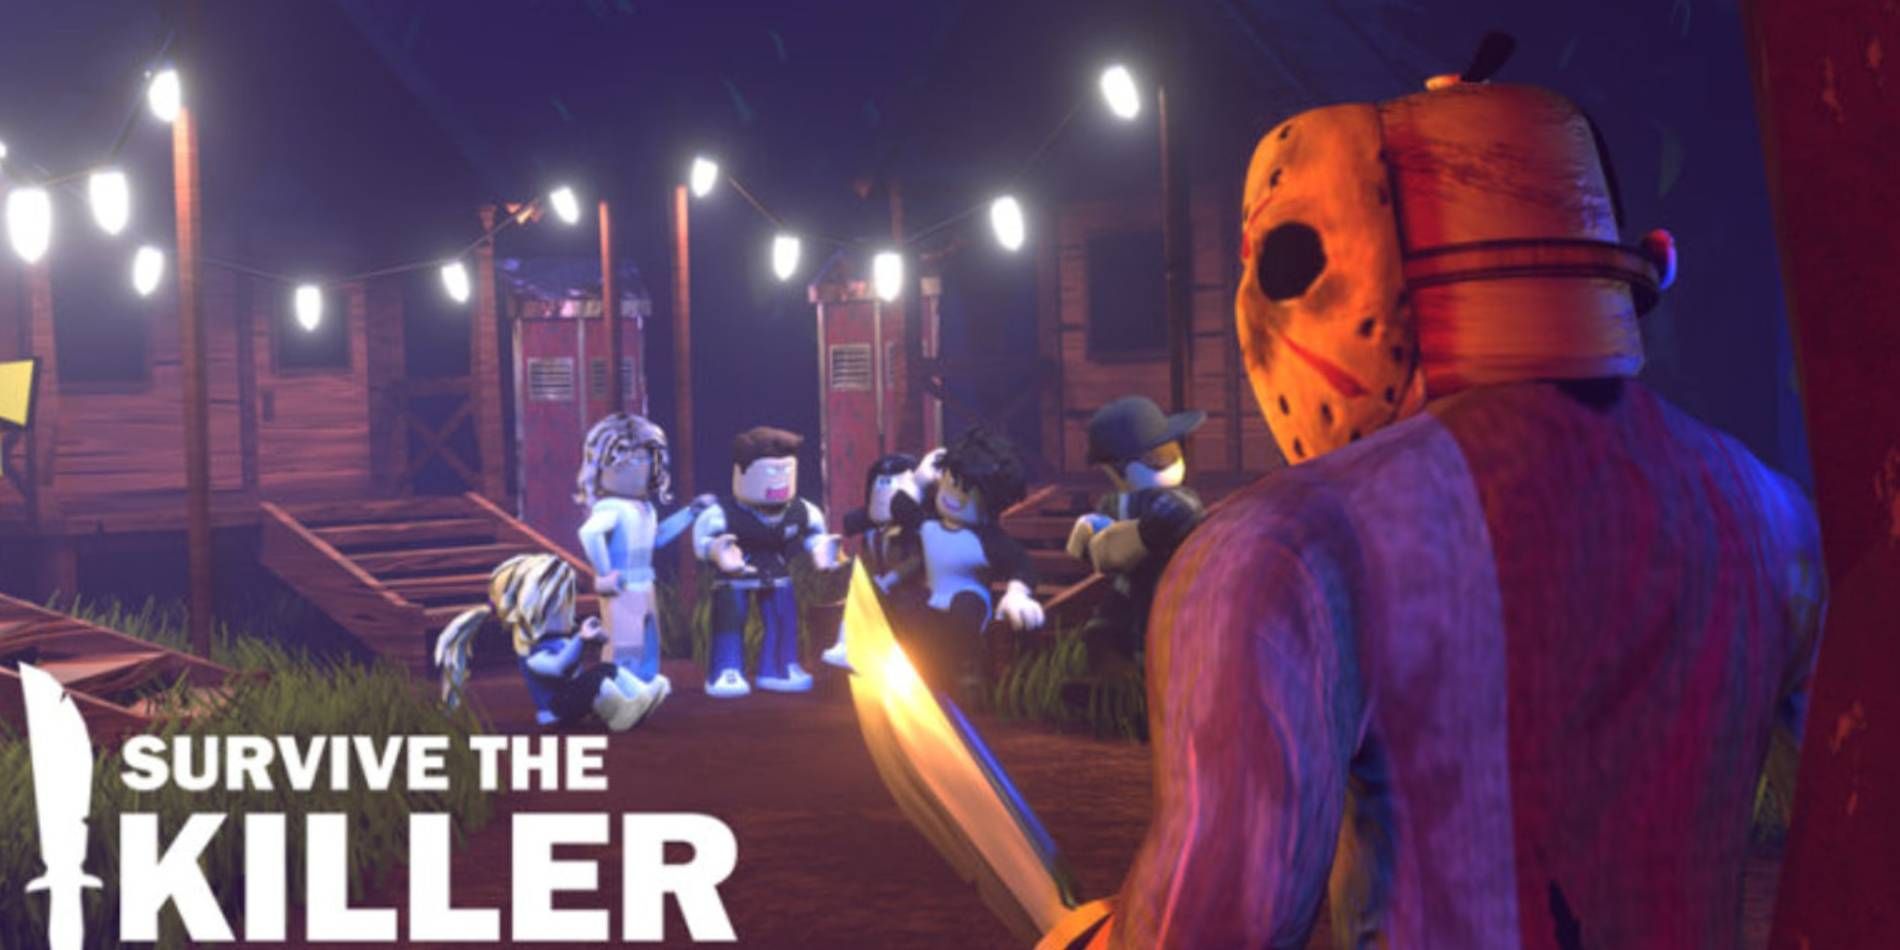 Roblox: Survive the Killer Promotional Image Referencing Friday the 13th Franchise